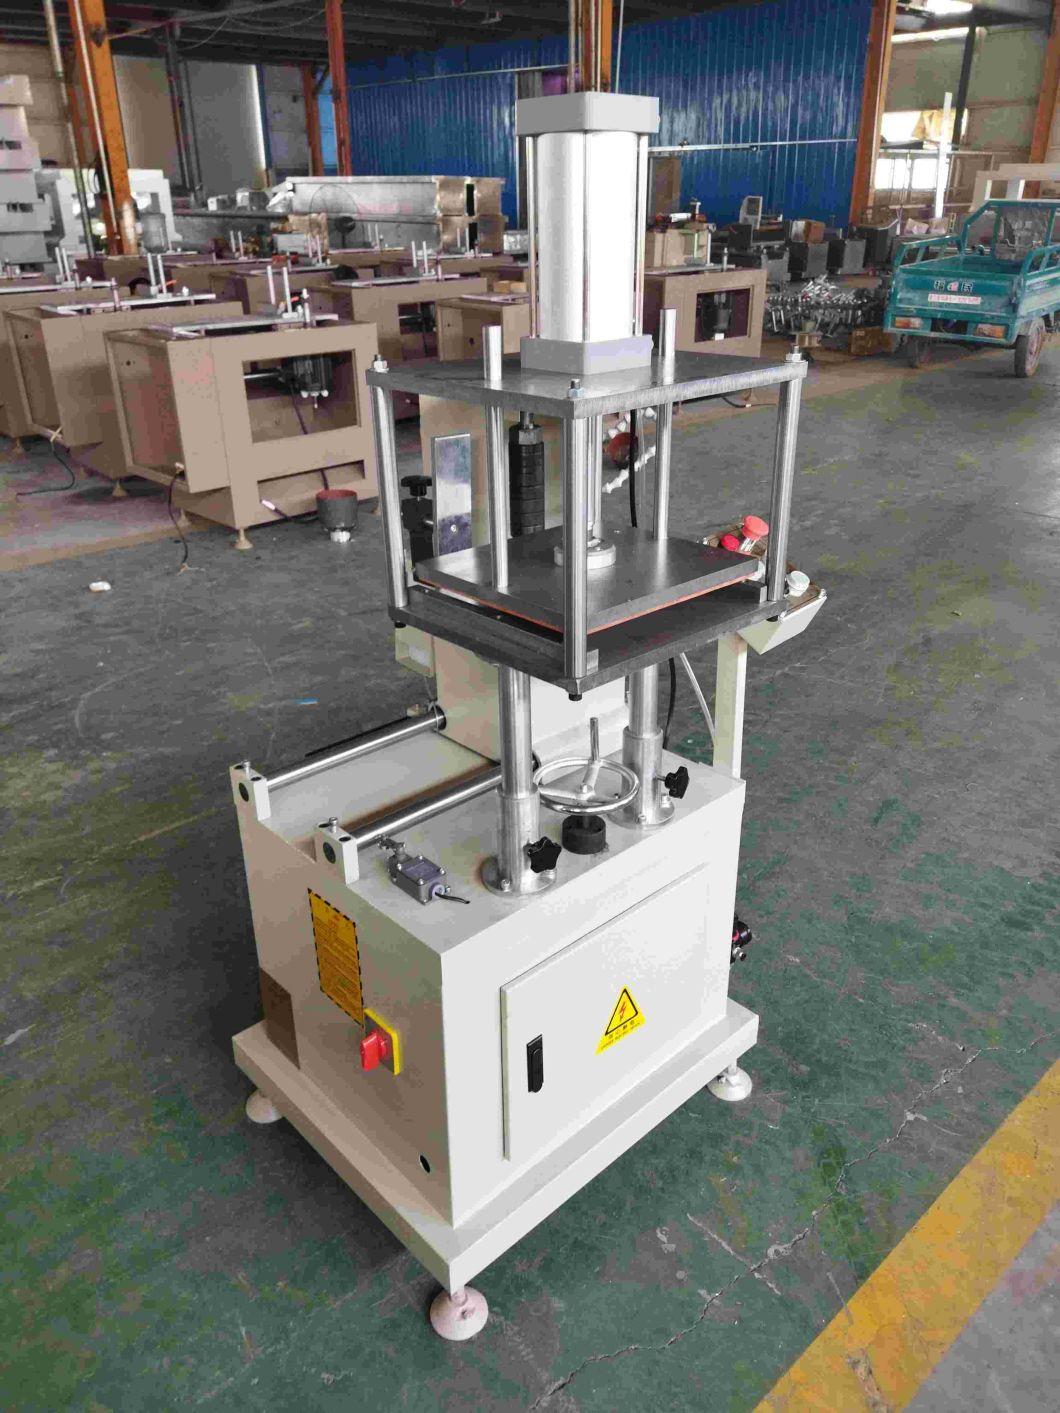 Lxd-200A Aluminum Profile Milling Machine for Machining End Faces CNC Cutting Machine for Aluminum Doors and Windows Making CNC Cutter